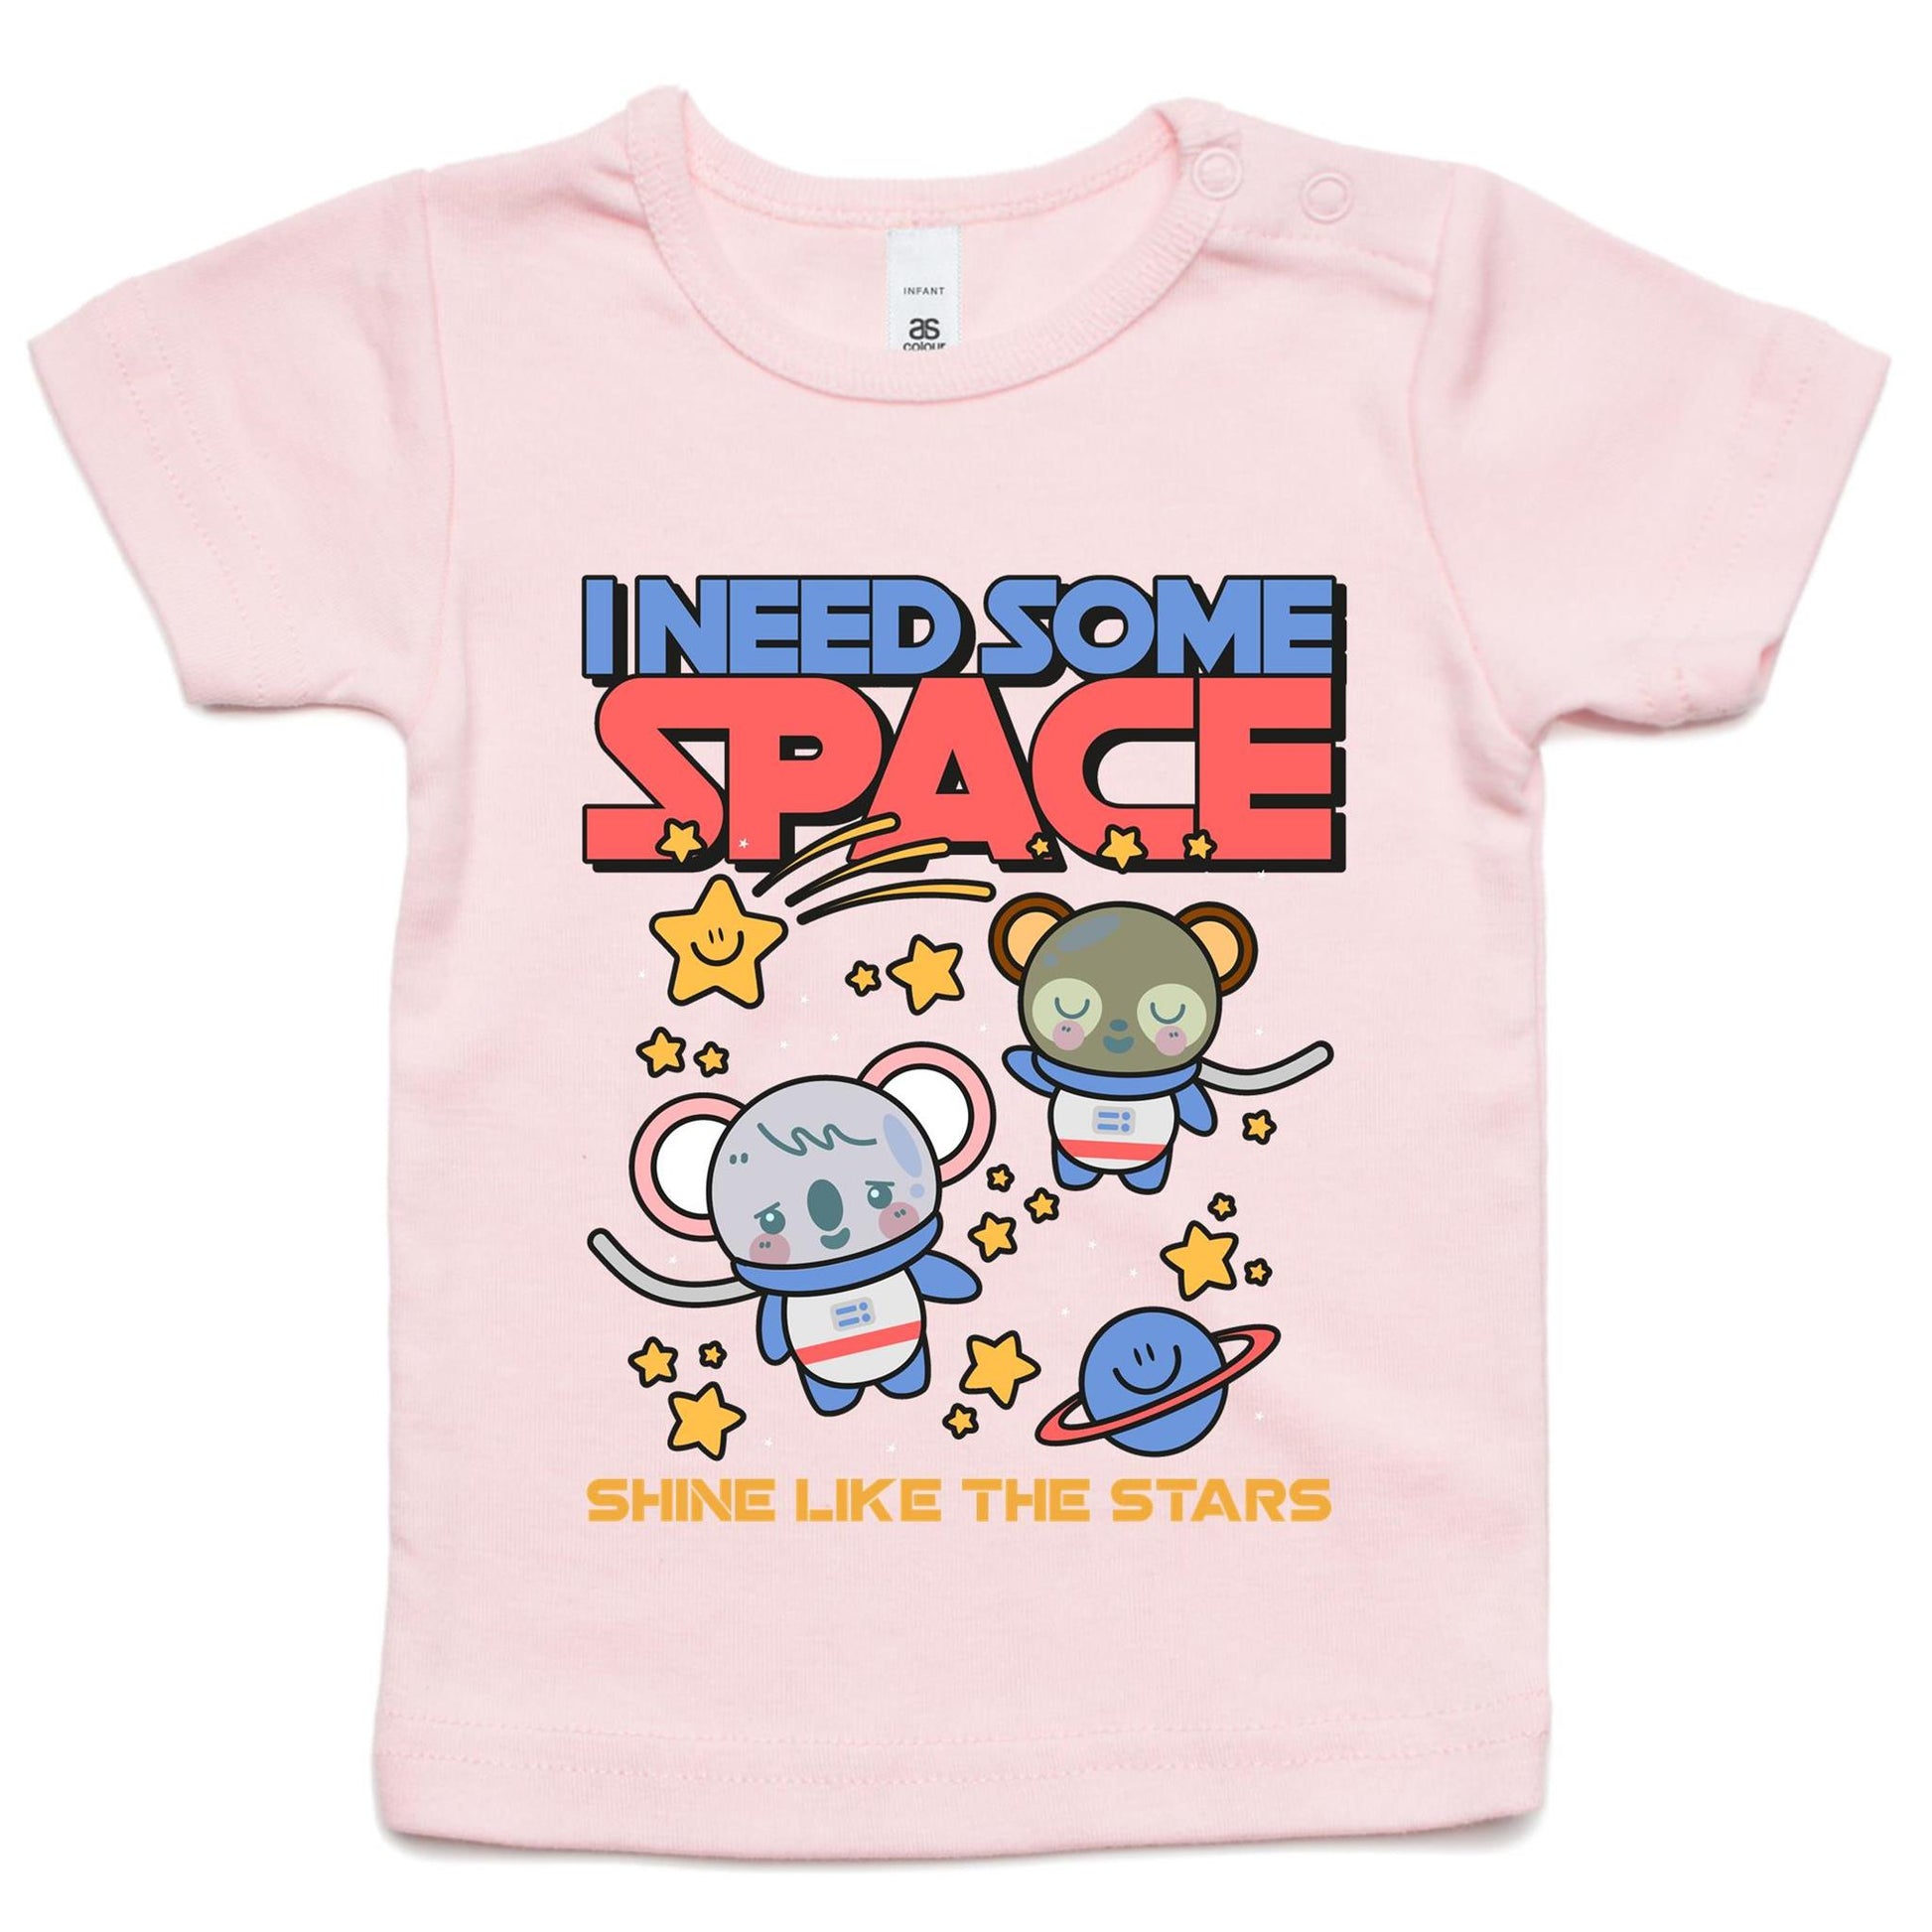 I Need Some Space - Baby T-shirt Pink Baby T-shirt Space